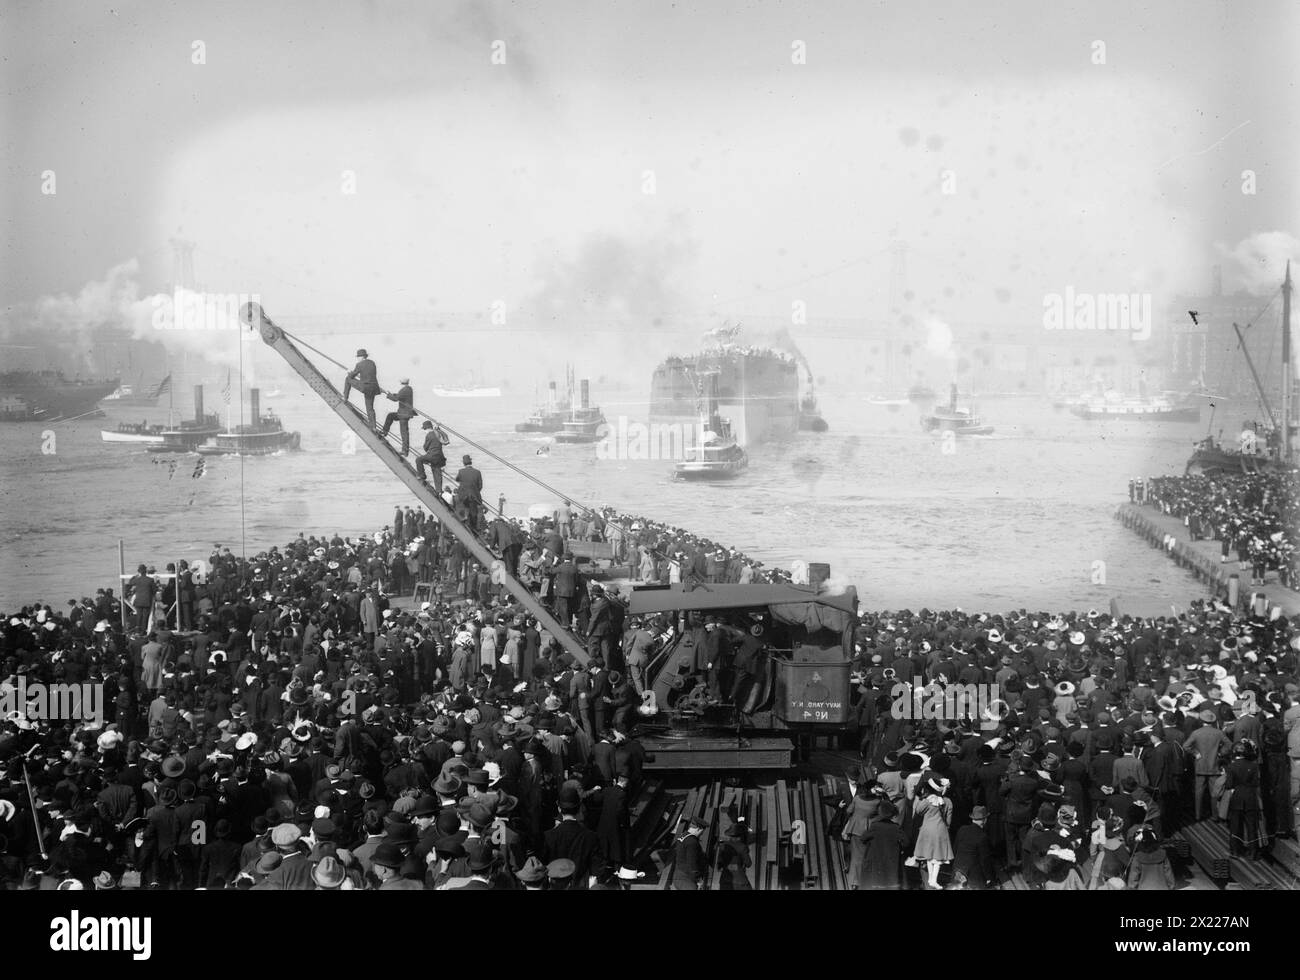 Launch of NEW YORK (reversed), 1912. Shows the crowd at the launching of the battleship the USS New York at the New York Navy Yard in Brooklyn, New York, October 30, 1912. Stock Photo